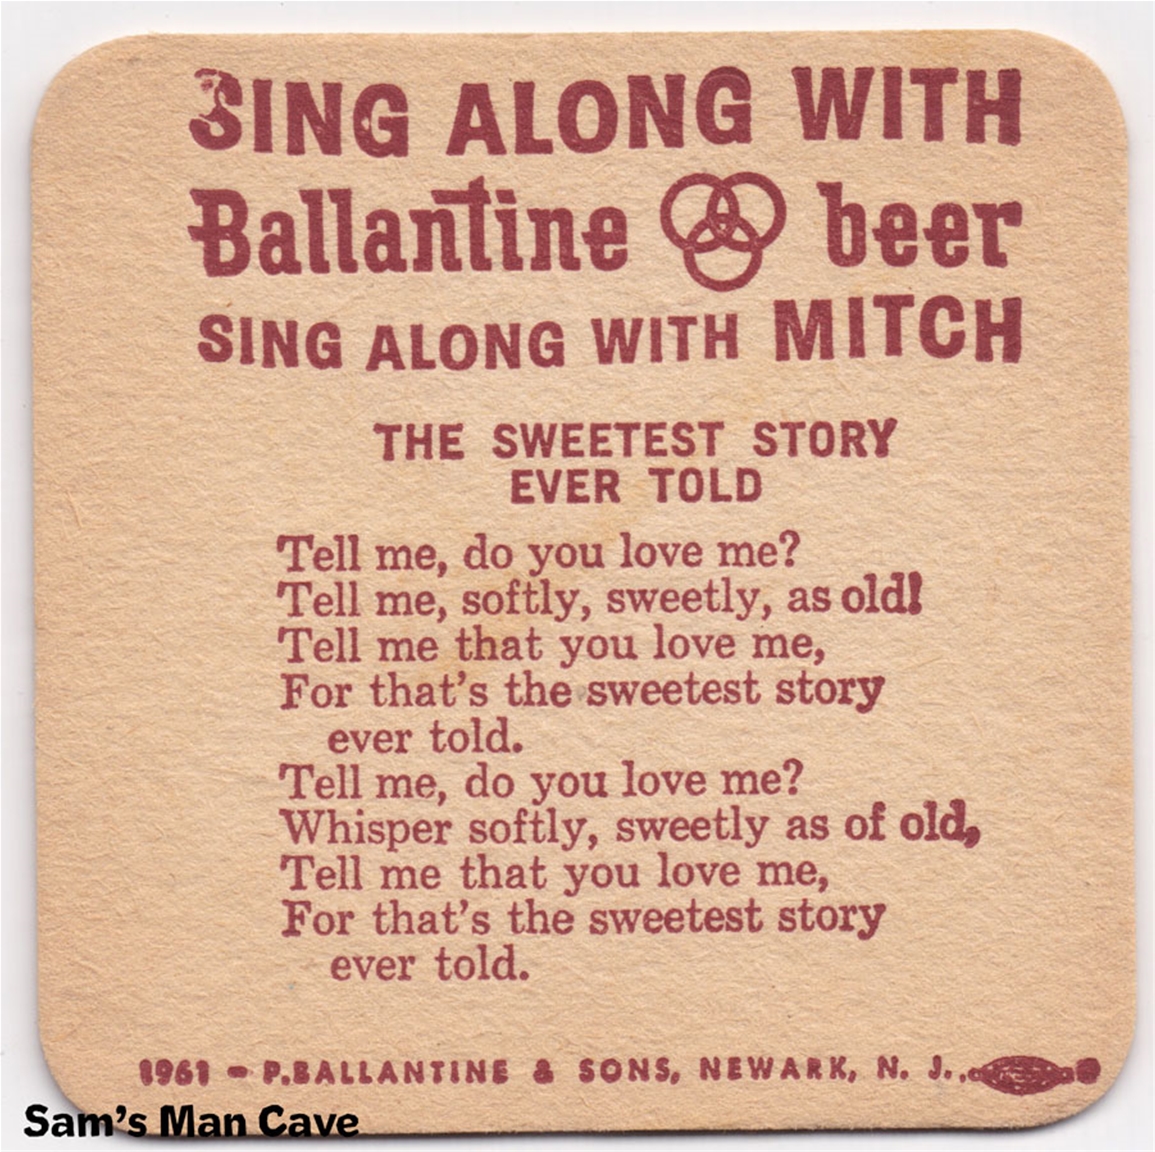 Ballantine Sing Along Sweetest Story Coaster front of coaster